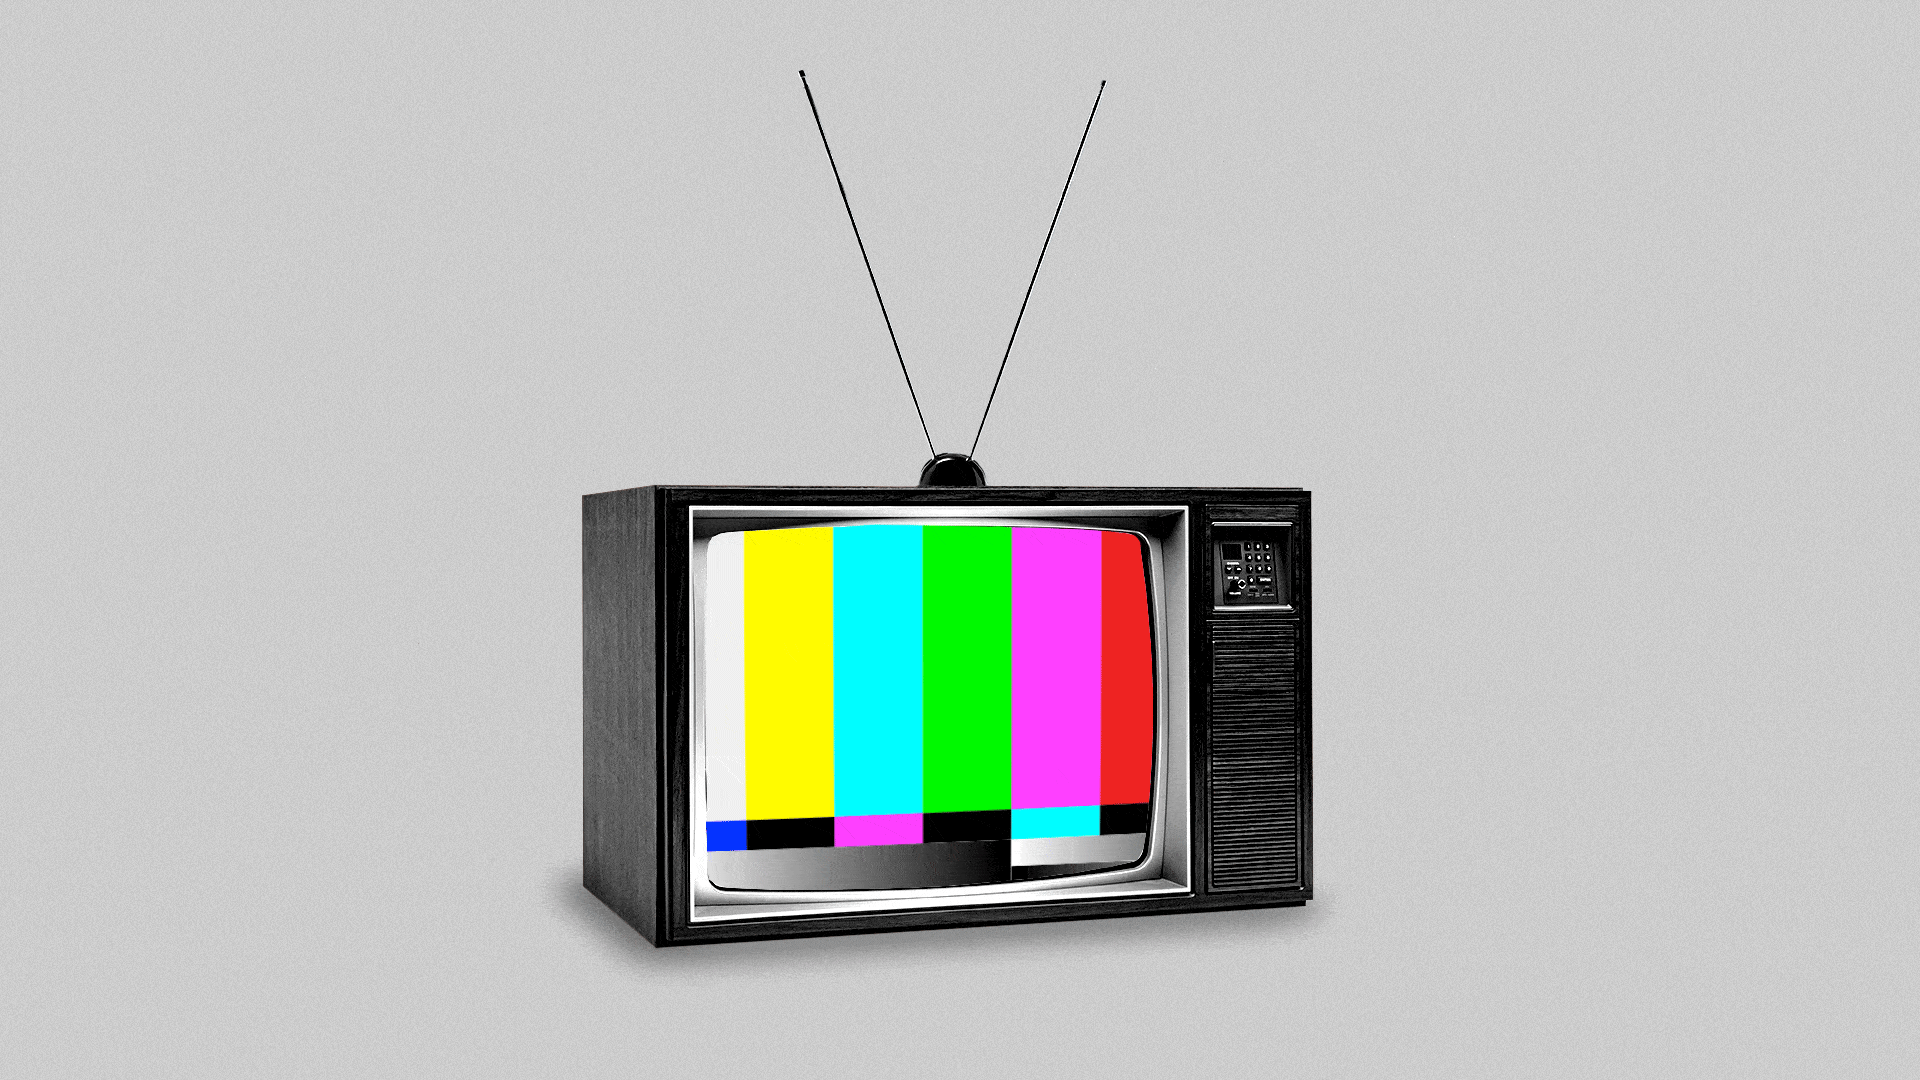 Illustration of a television